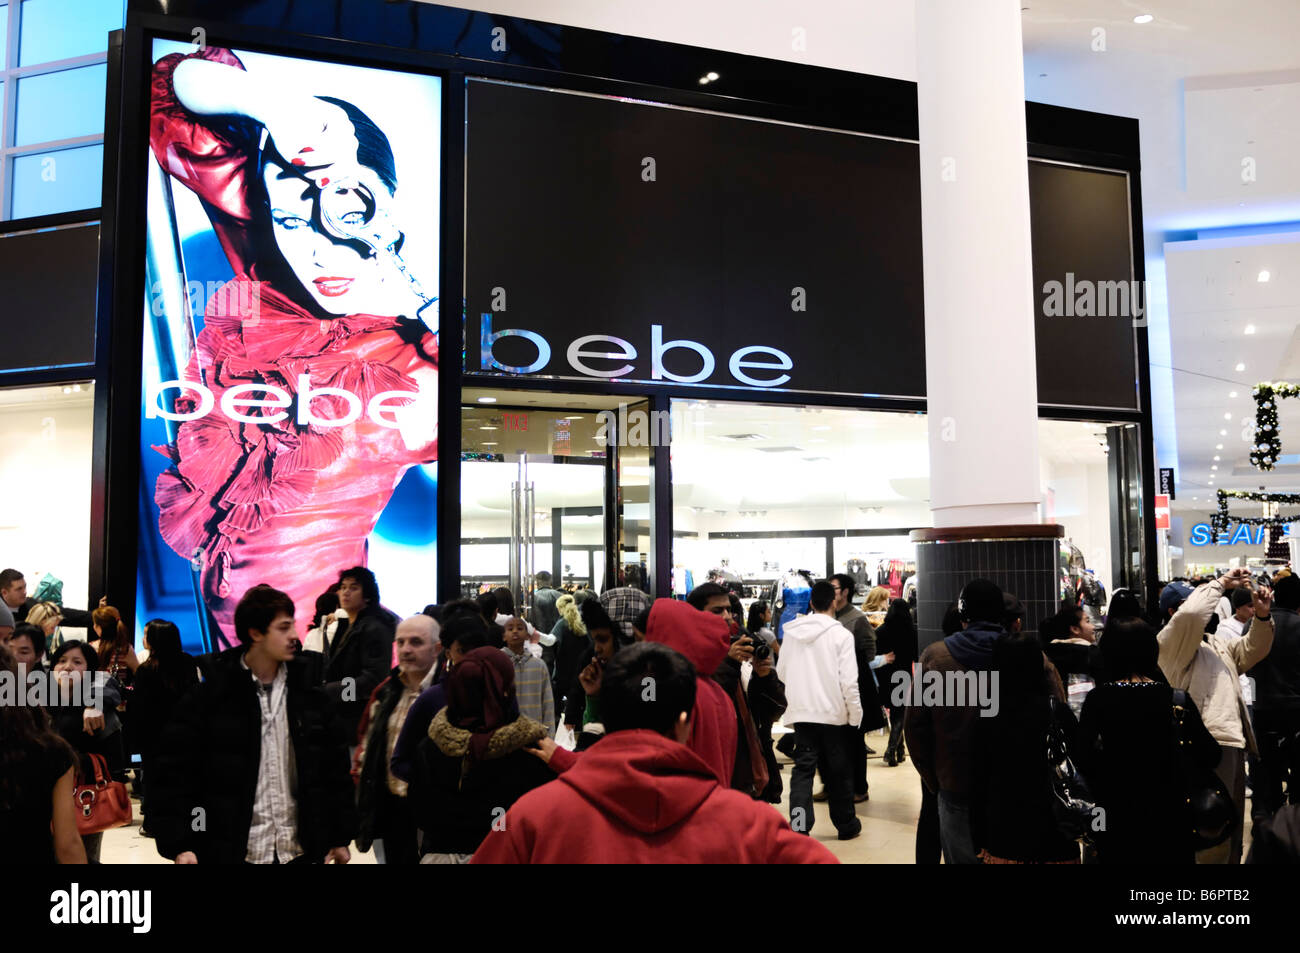 Bebe outlet on Boxing Day in a Shopping Mall Stock Photo